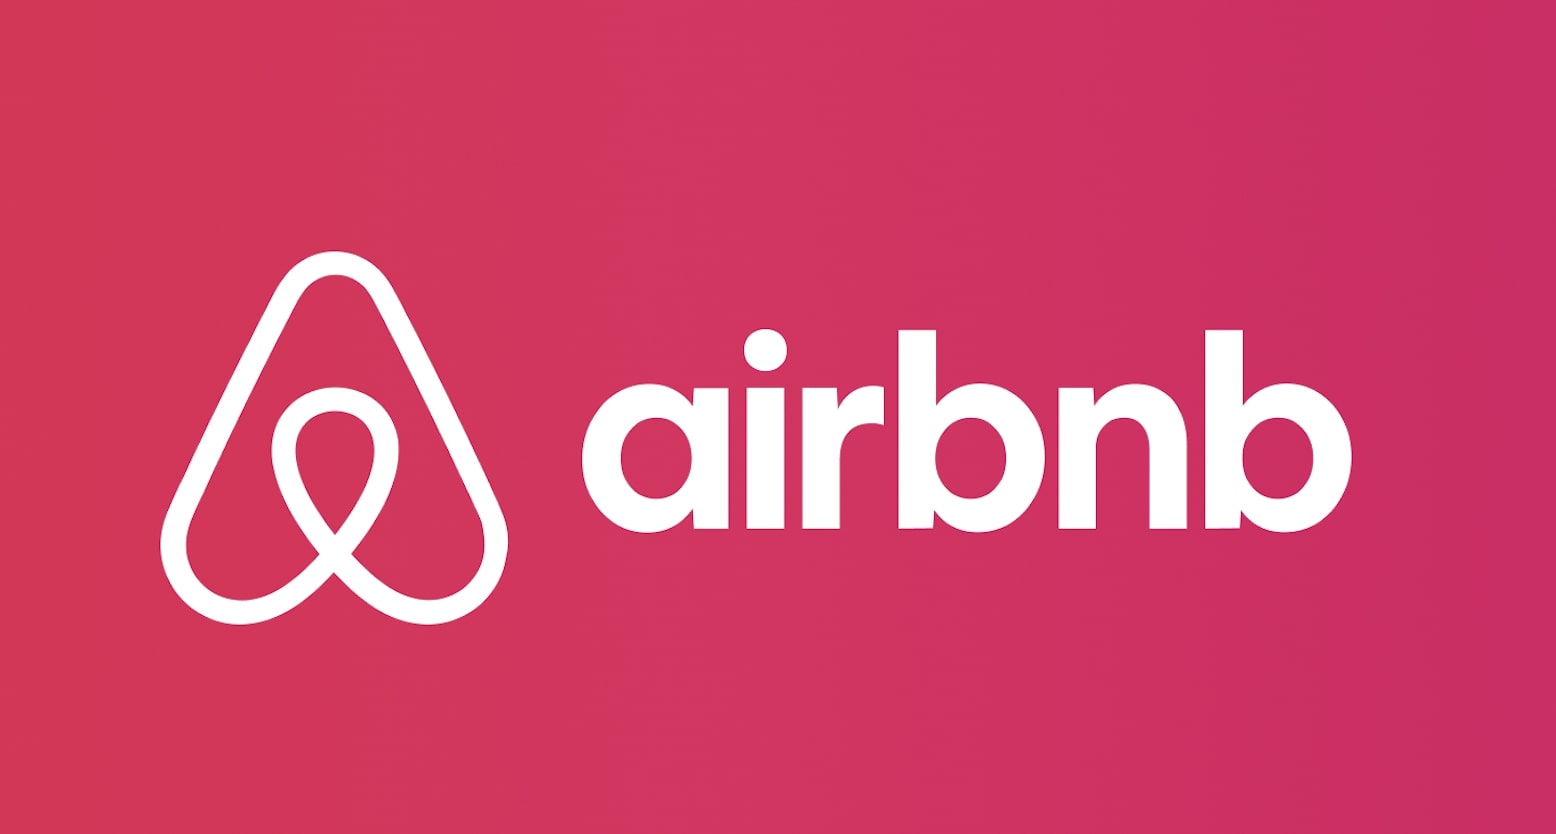 Airbnb's white logo on a pink background